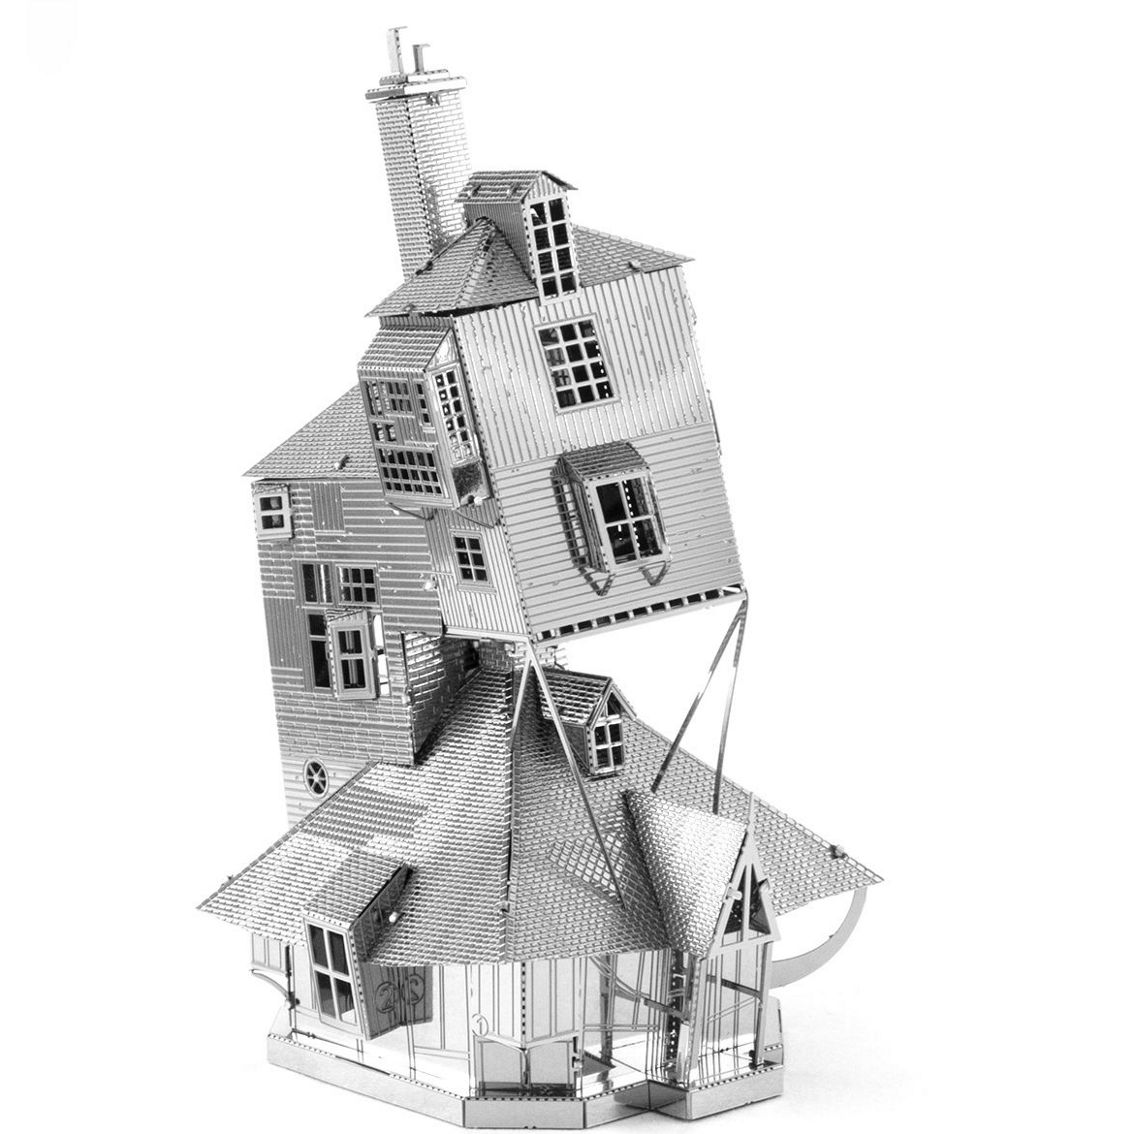 Fascinations Metal Earth 3D Model Kit - Harry Potter The Burrow Weasley Family Home - Image 3 of 5